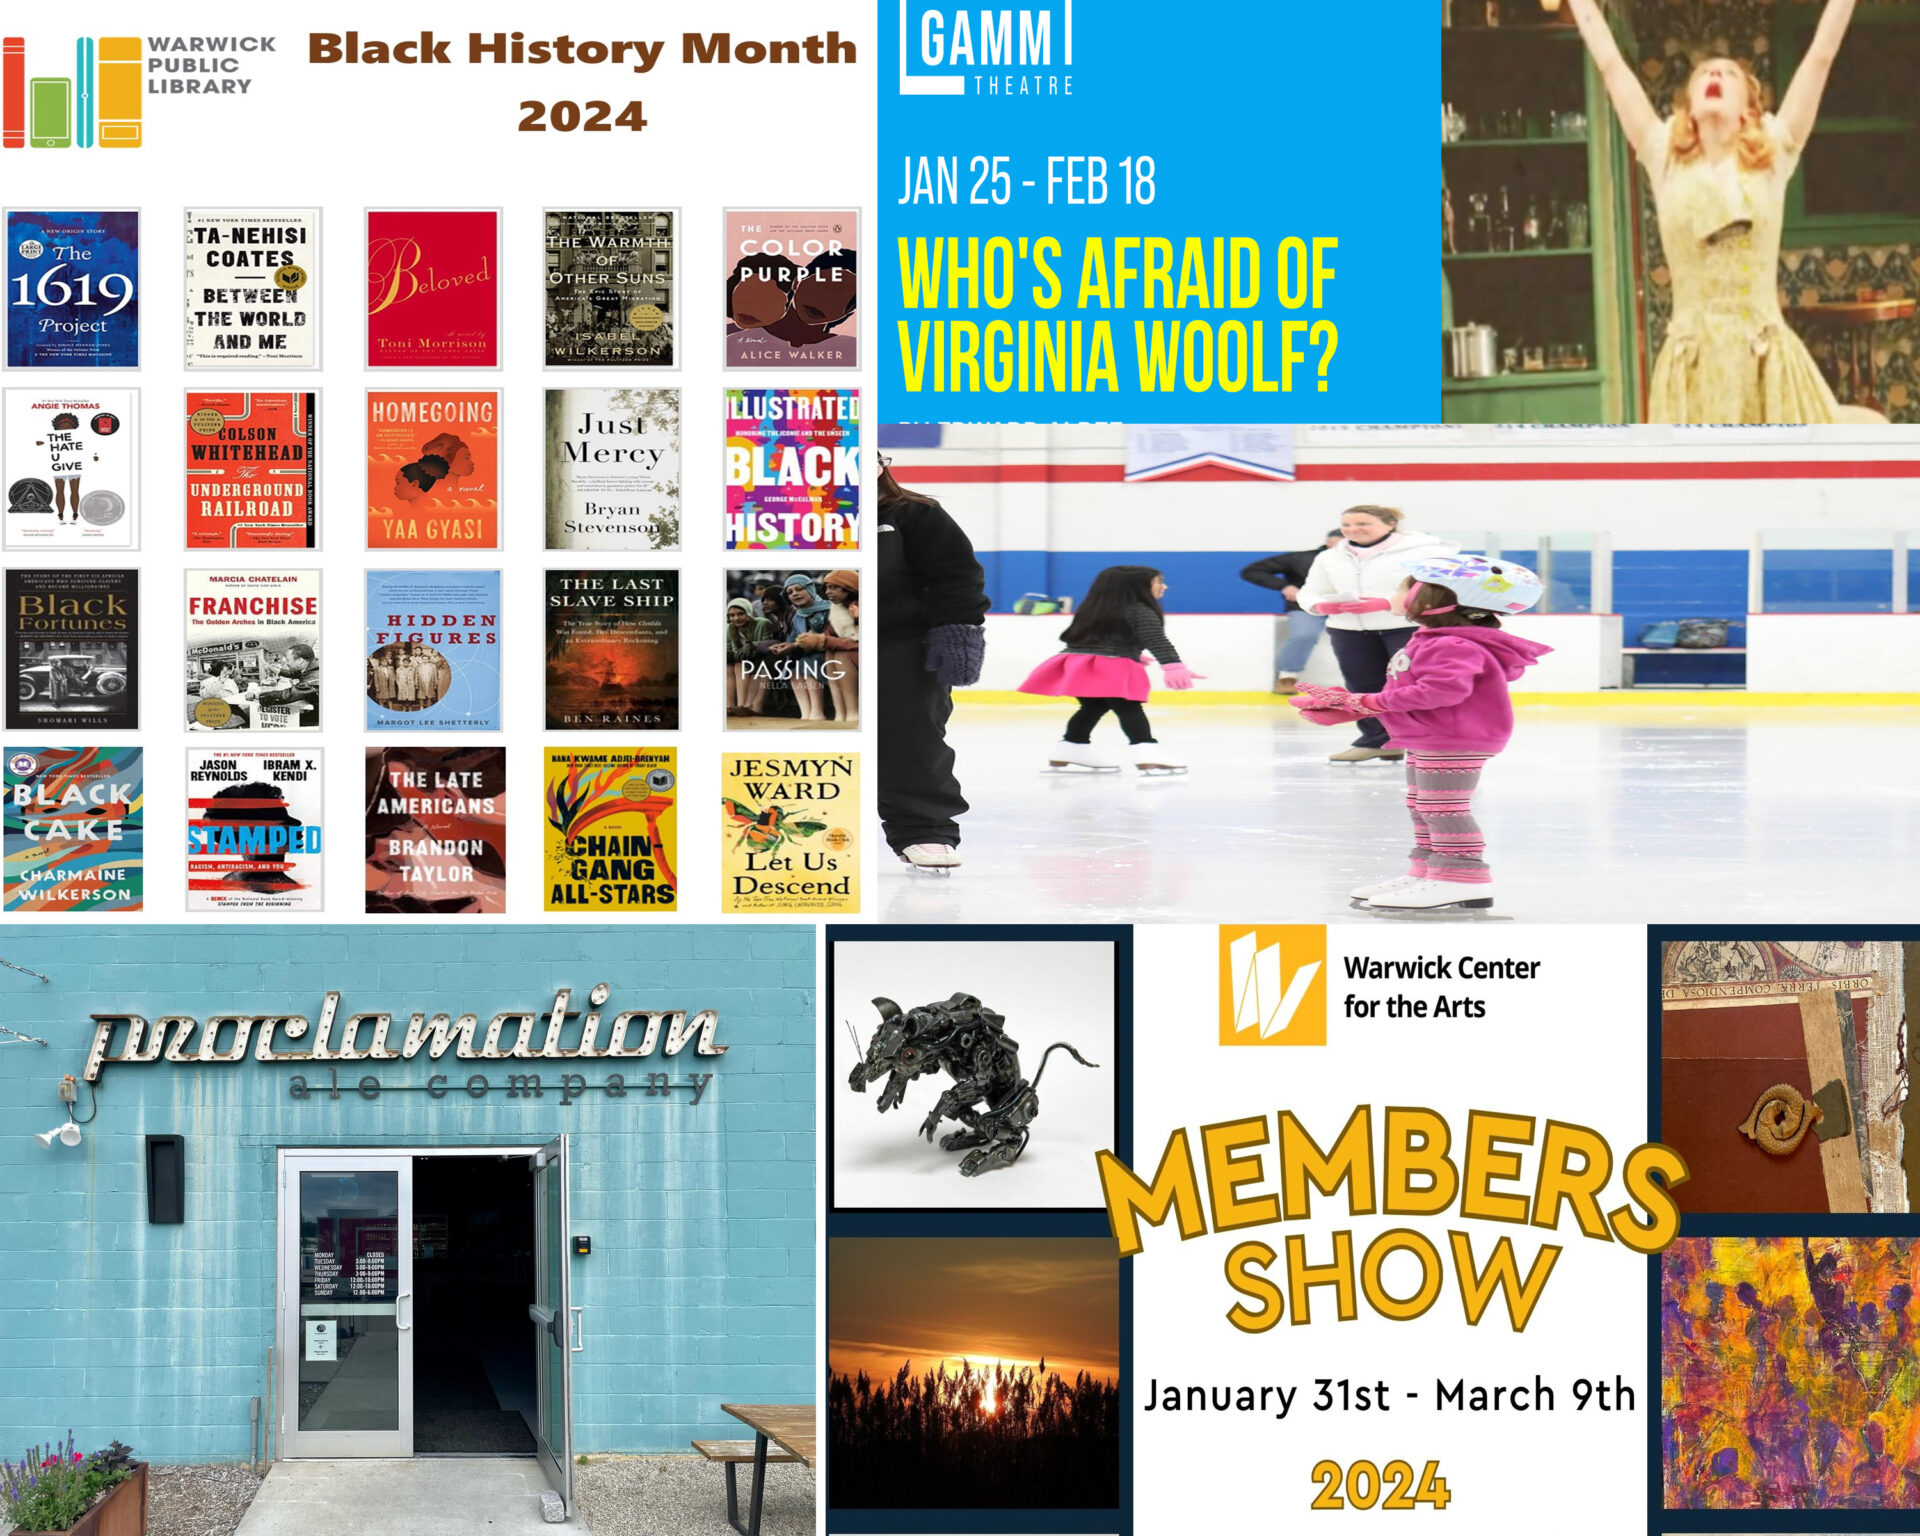 [CREDIT: Warwick Post] Warwick Weekend events for the first February weekend include a free movie, new art, skating and some Black History reading suggestions.